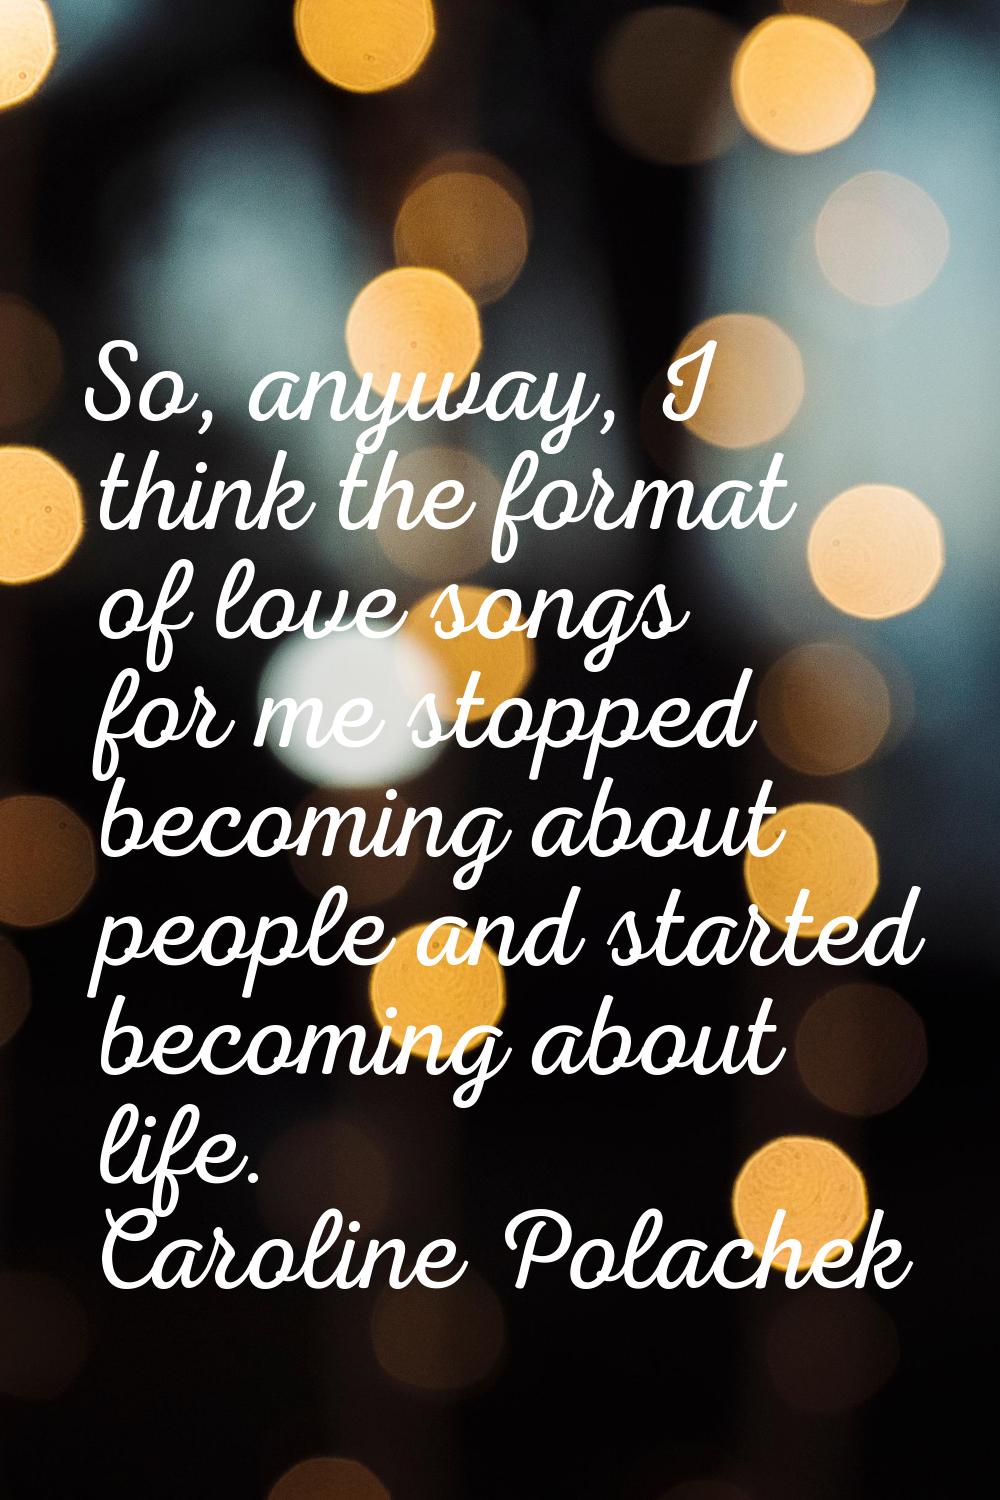 So, anyway, I think the format of love songs for me stopped becoming about people and started becom